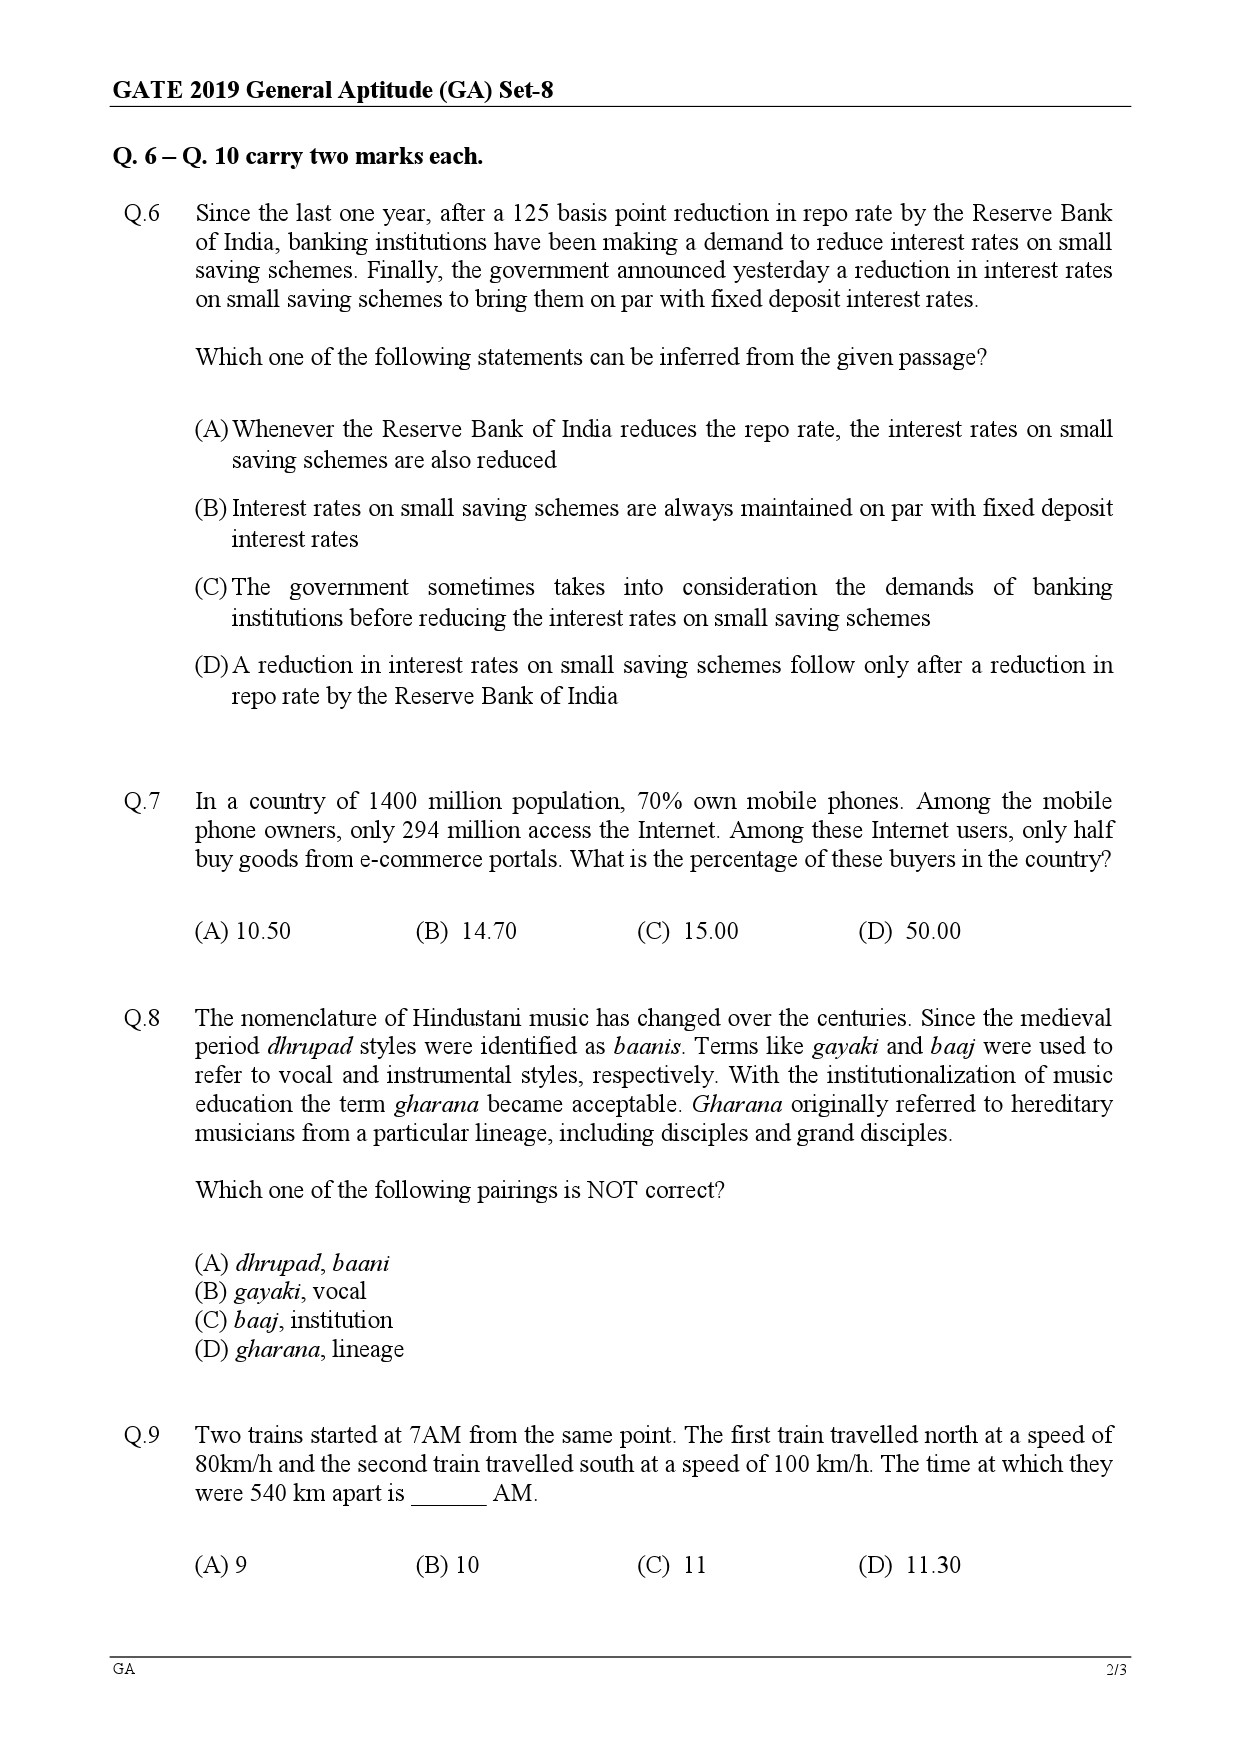 GATE Exam Question Paper 2019 Geology and Geophysics 2